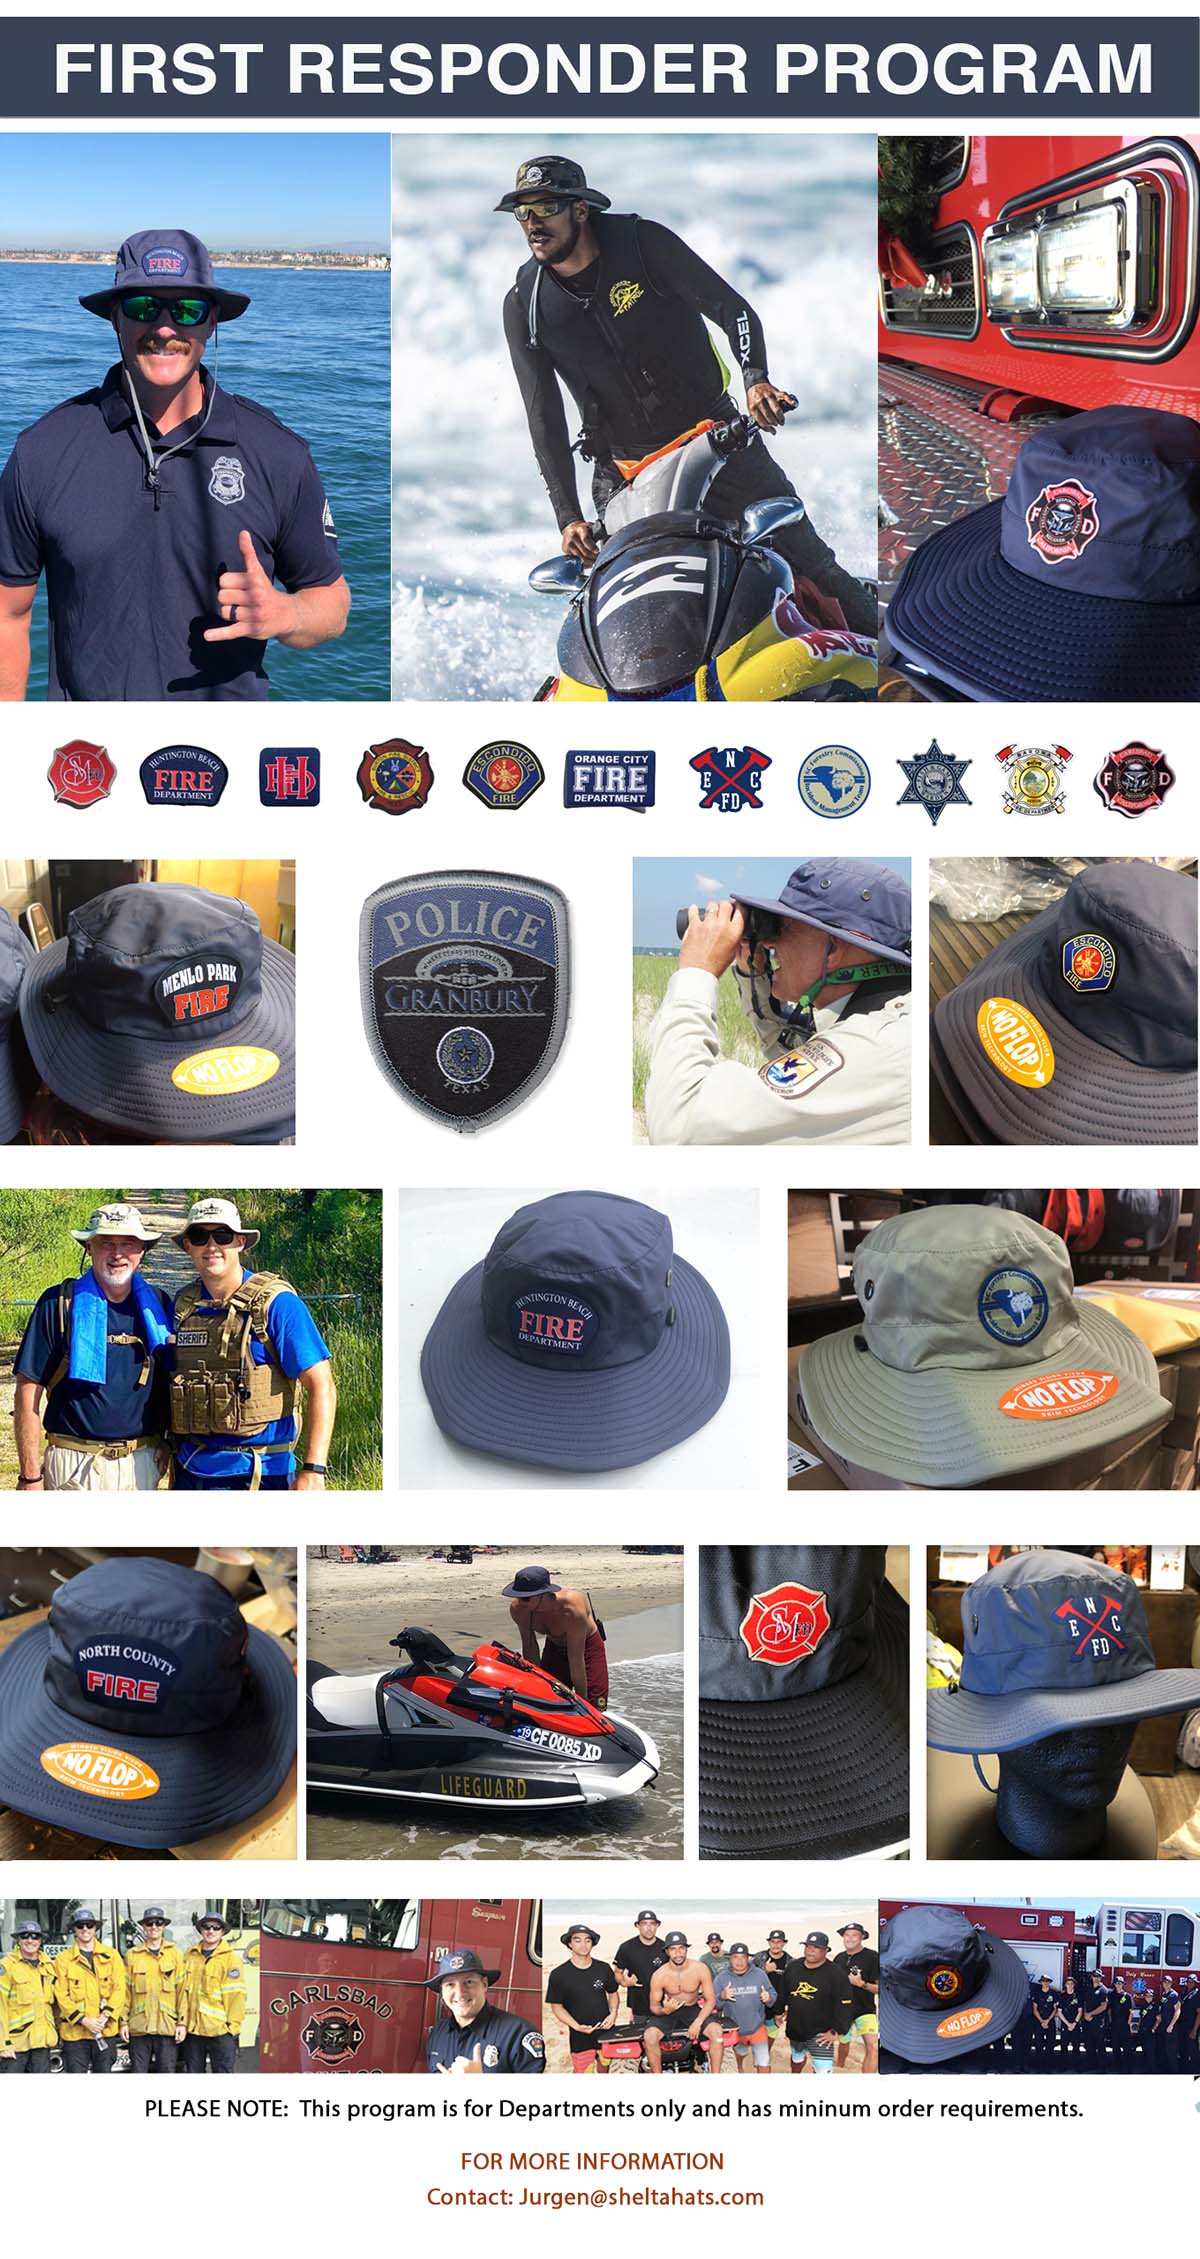 The best sun hat ever made for Lifeguards, Firefighters and Law Enforcement. We are proud to offer a custom program for you men and women out there protecting our safety, property and rights. Working outdoors can expose you to harmful UV rays. Offering you the best sun hat possible that doesn't get in the way while doing your job is our mission.  We offer your logo on a custom woven patch that is sealed to the hat. Please contact Jurgen@sheltahats.com for details on how we can get your department some Shelta! 